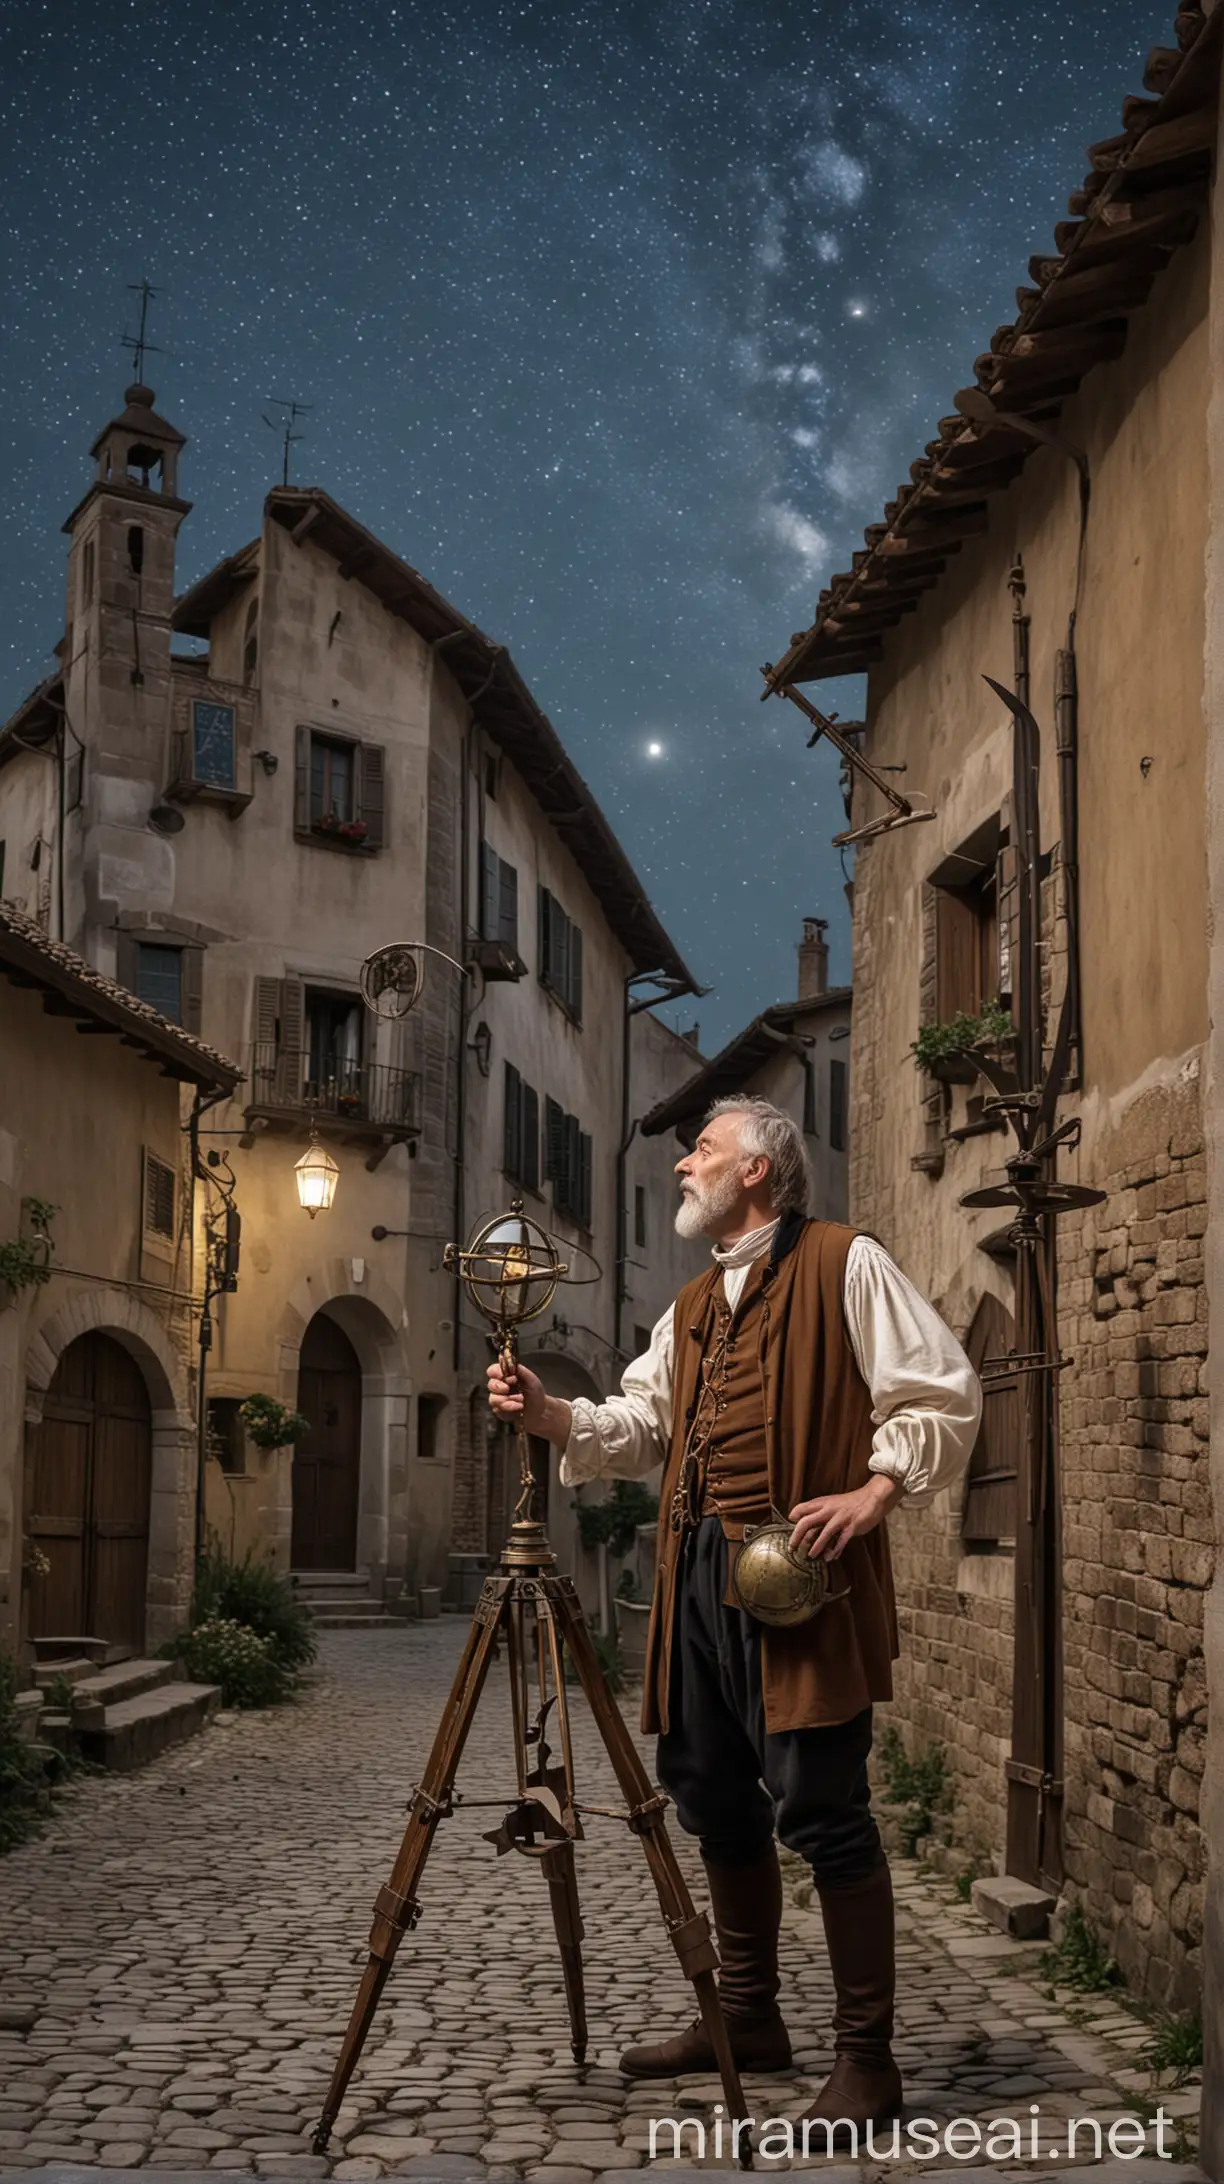 An 16th century Astronomer from the times of Galileo holding a sextant or octant up to the night sky. He is in an old Italian village. Include an armillary sphere next to him.